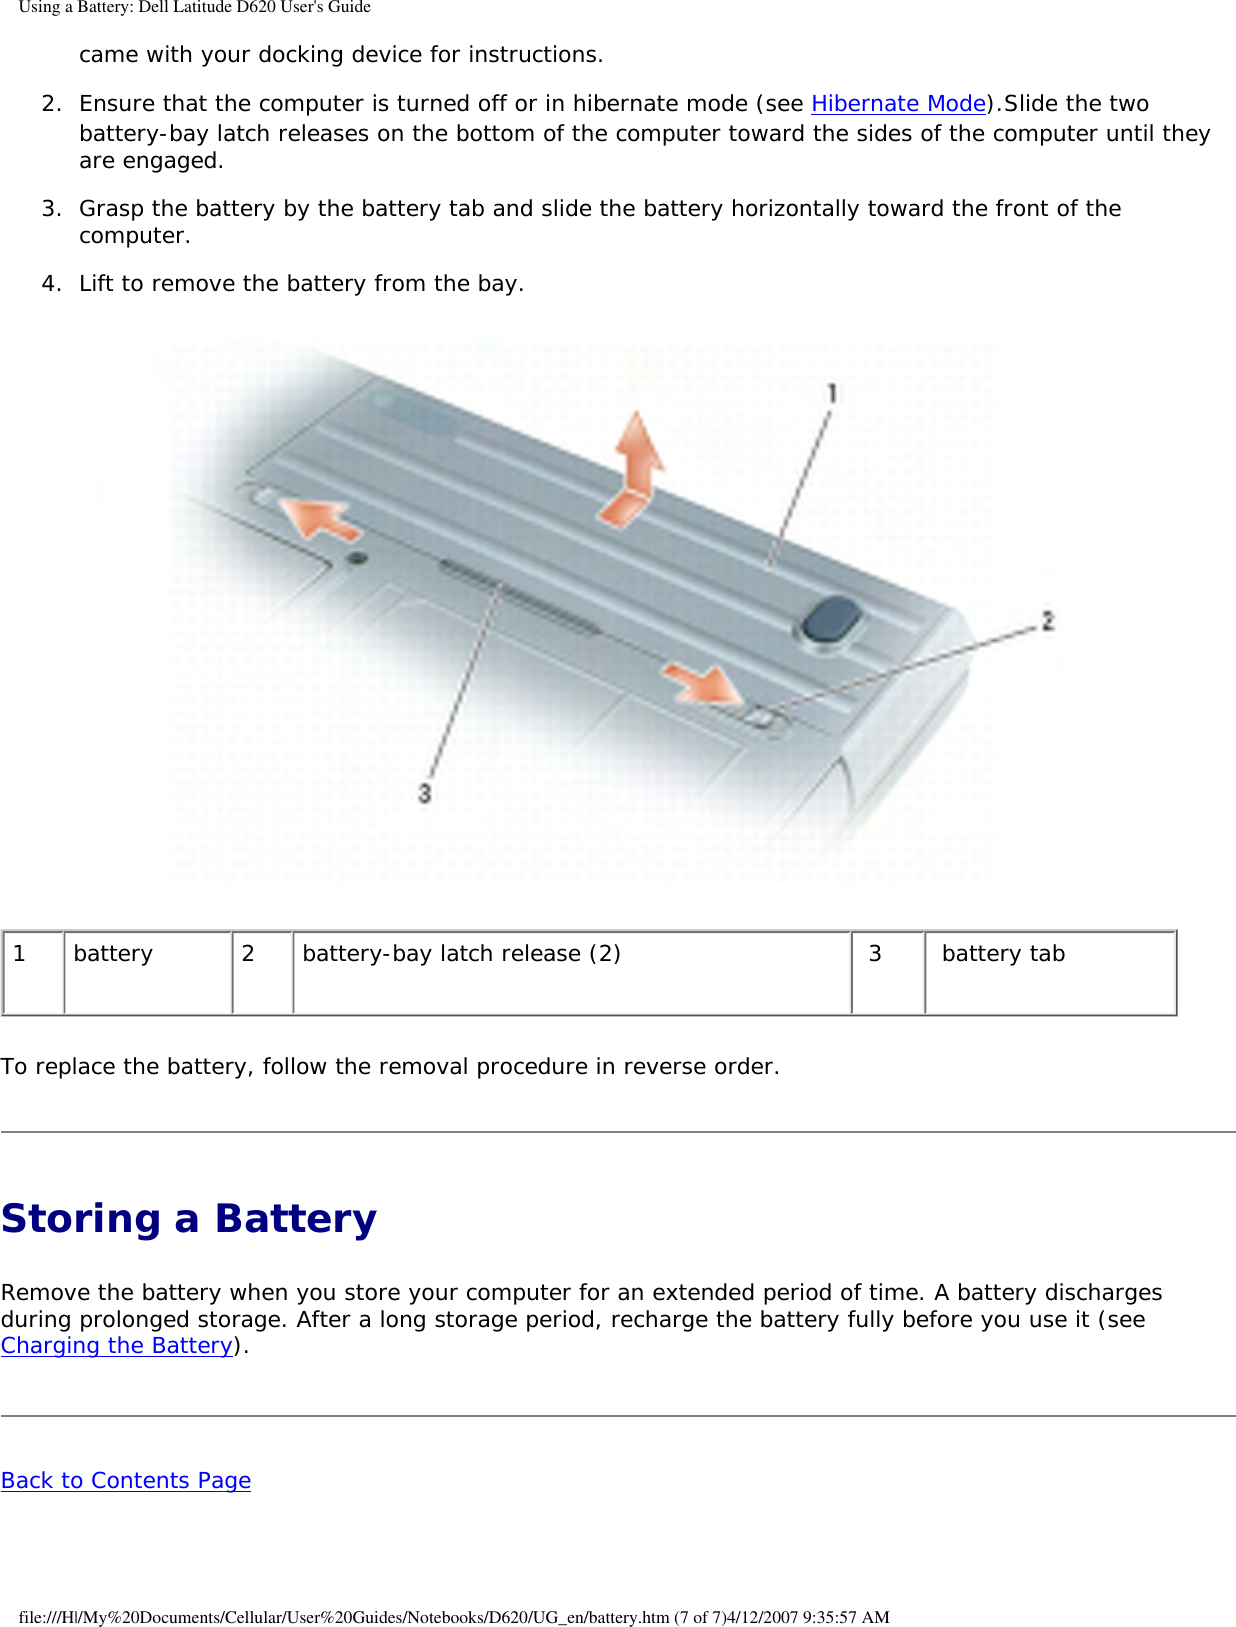 Using a Battery: Dell Latitude D620 User&apos;s Guidecame with your docking device for instructions.   2.  Ensure that the computer is turned off or in hibernate mode (see Hibernate Mode).Slide the two battery-bay latch releases on the bottom of the computer toward the sides of the computer until they are engaged.   3.  Grasp the battery by the battery tab and slide the battery horizontally toward the front of the computer.   4.  Lift to remove the battery from the bay.    1 battery 2 battery-bay latch release (2)  3  battery tabTo replace the battery, follow the removal procedure in reverse order.Storing a Battery Remove the battery when you store your computer for an extended period of time. A battery discharges during prolonged storage. After a long storage period, recharge the battery fully before you use it (see Charging the Battery).Back to Contents Page file:///H|/My%20Documents/Cellular/User%20Guides/Notebooks/D620/UG_en/battery.htm (7 of 7)4/12/2007 9:35:57 AM